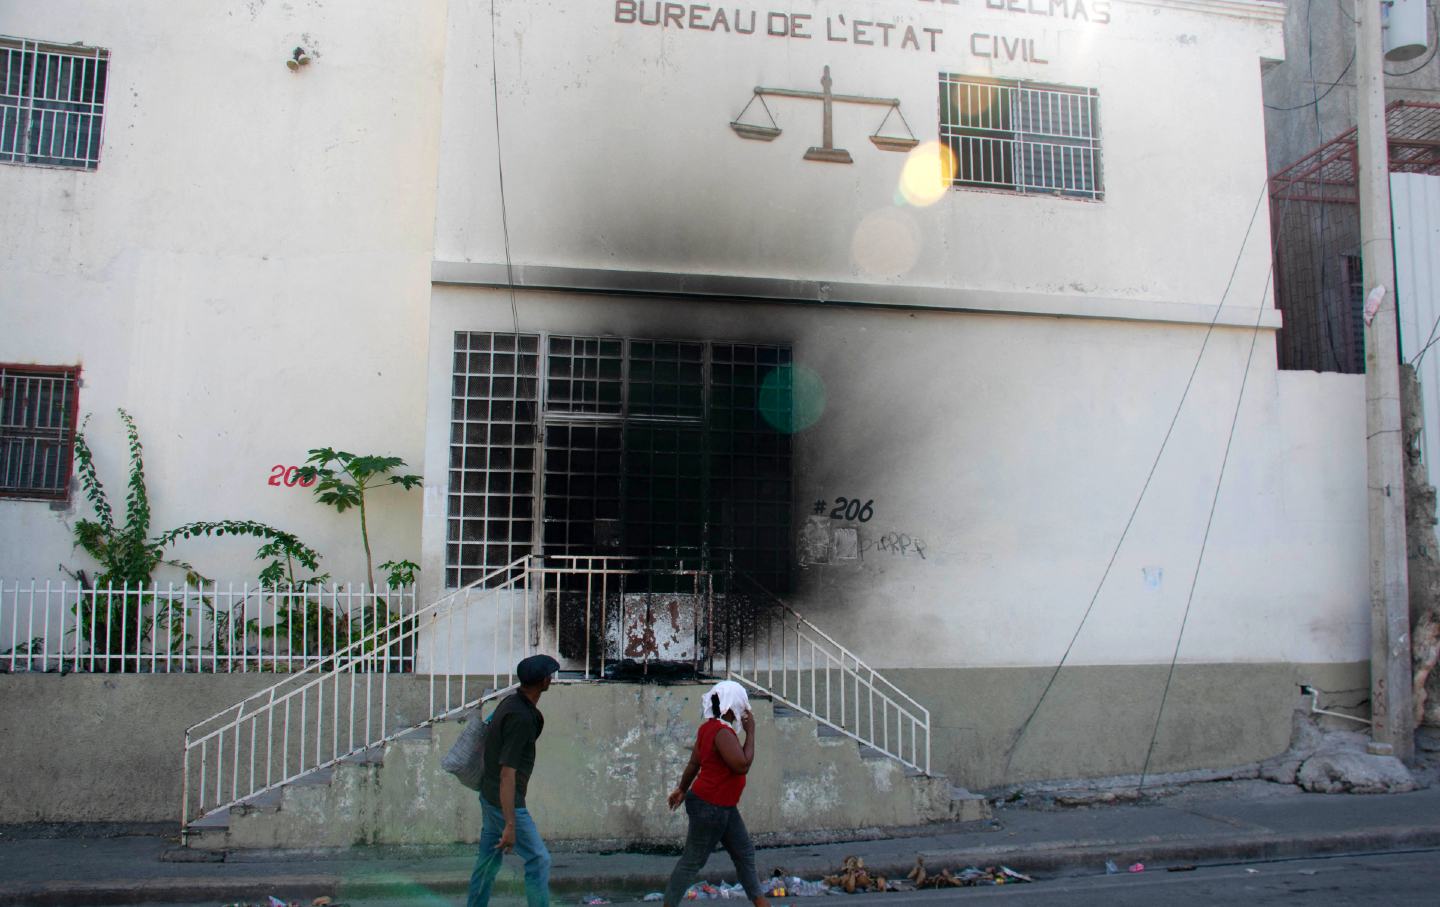 People walk by the tribunal set on fire the previous day by armed gangs in Port-au-Prince, Haiti, on March 6, 2024. Haiti’s capital was largely shut down on March 4, as authorities imposed a state of emergency after an attack on a prison freed thousands of inmates.